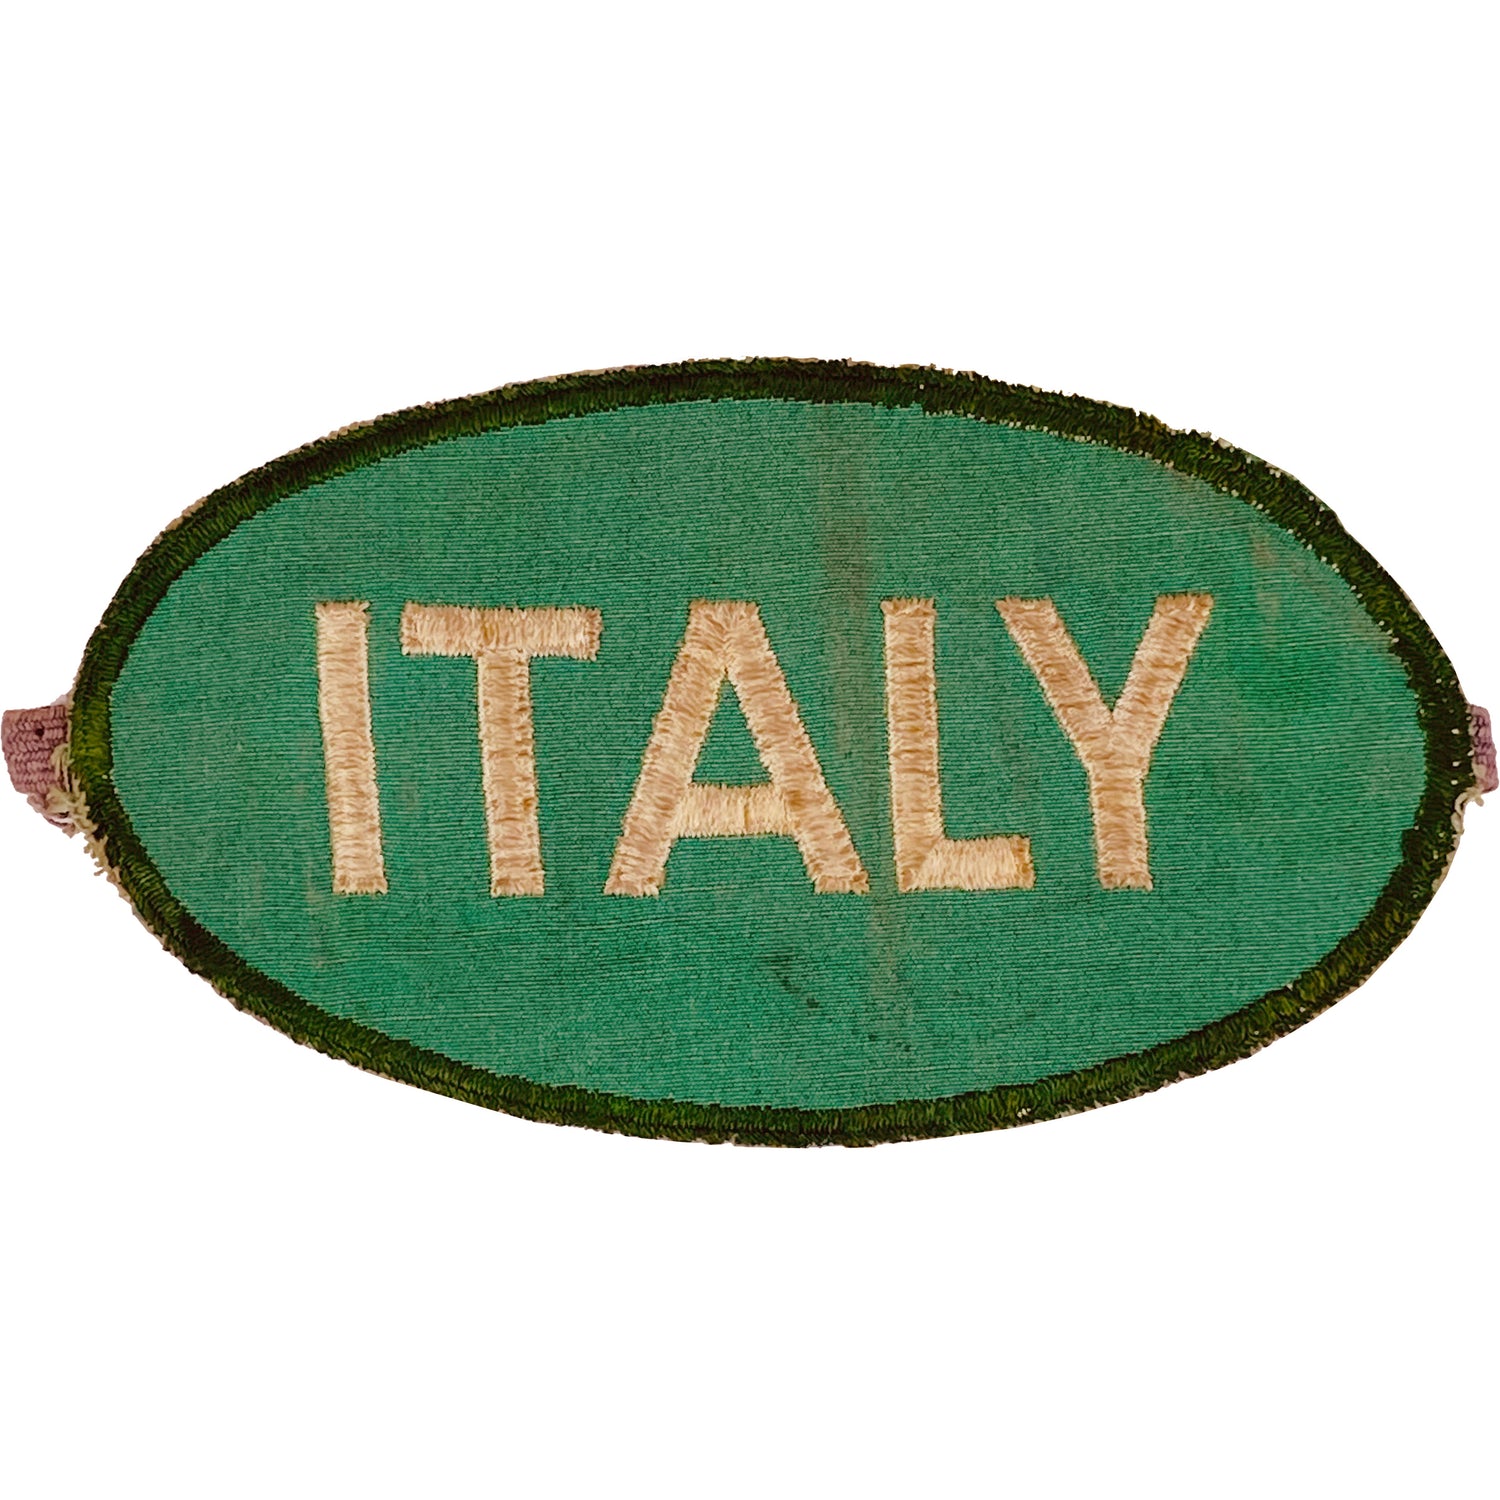 VINTAGE WWII ITALY ARM PATCH